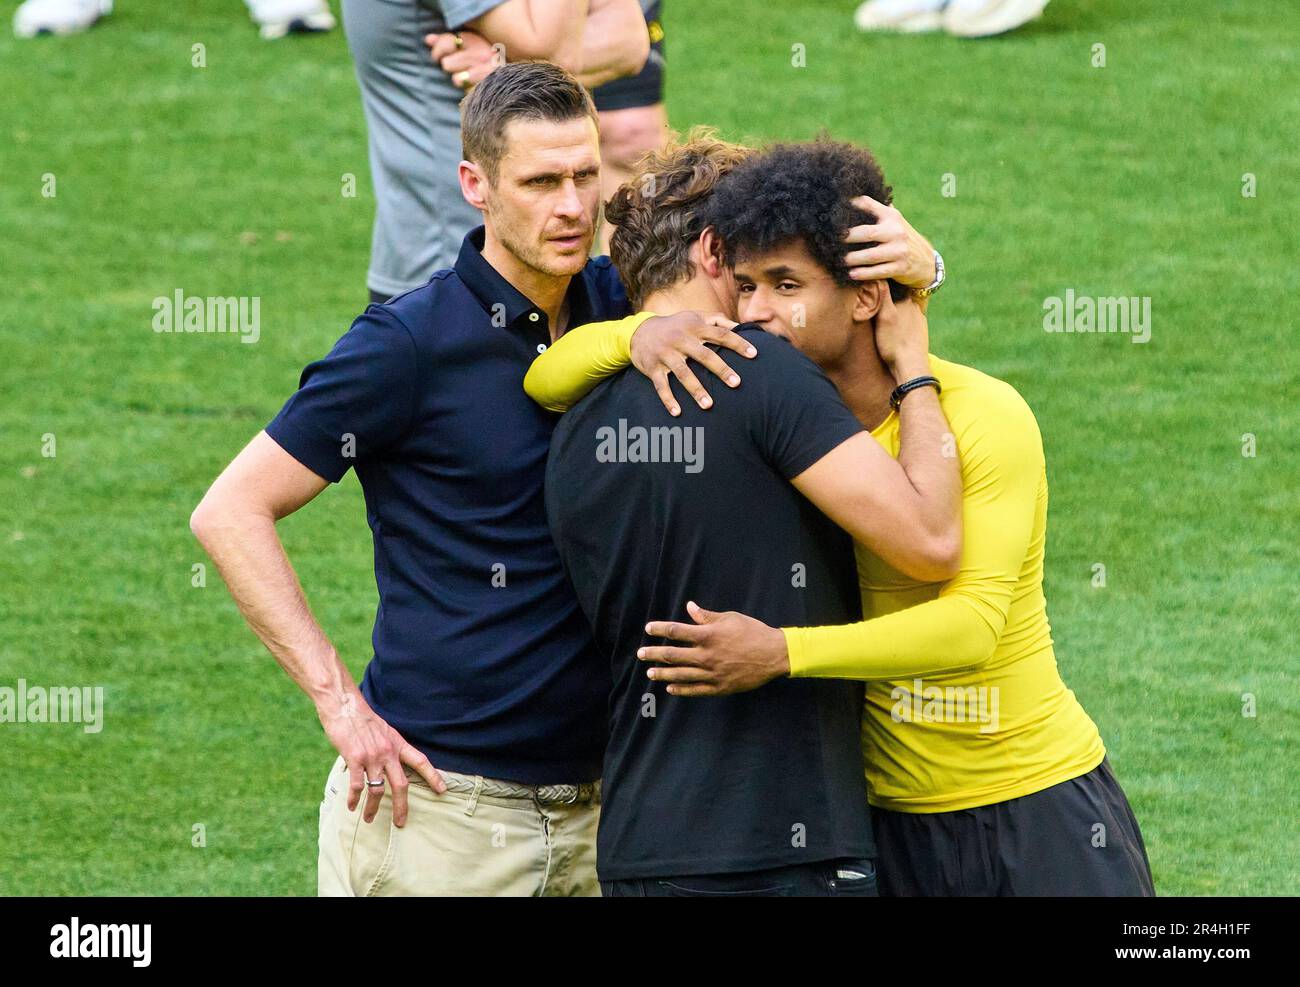 Edin Terzic, head coach, Chef - Trainer BVB Karim Adeyemi, BVB 27 Sebastian KEHL, consultant, former BVB player,  after the match BORUSSIA DORTMUND - FSV MAINZ 05 2-2, BVB lost the chance for the title. 1.German Football League on May 27, 2023 in Dortmund, Germany. Season 2022/2023, matchday 34, 1.Bundesliga, 34.Spieltag, BVB, MZ,  © Peter Schatz / Alamy Live News    - DFL REGULATIONS PROHIBIT ANY USE OF PHOTOGRAPHS as IMAGE SEQUENCES and/or QUASI-VIDEO - Stock Photo